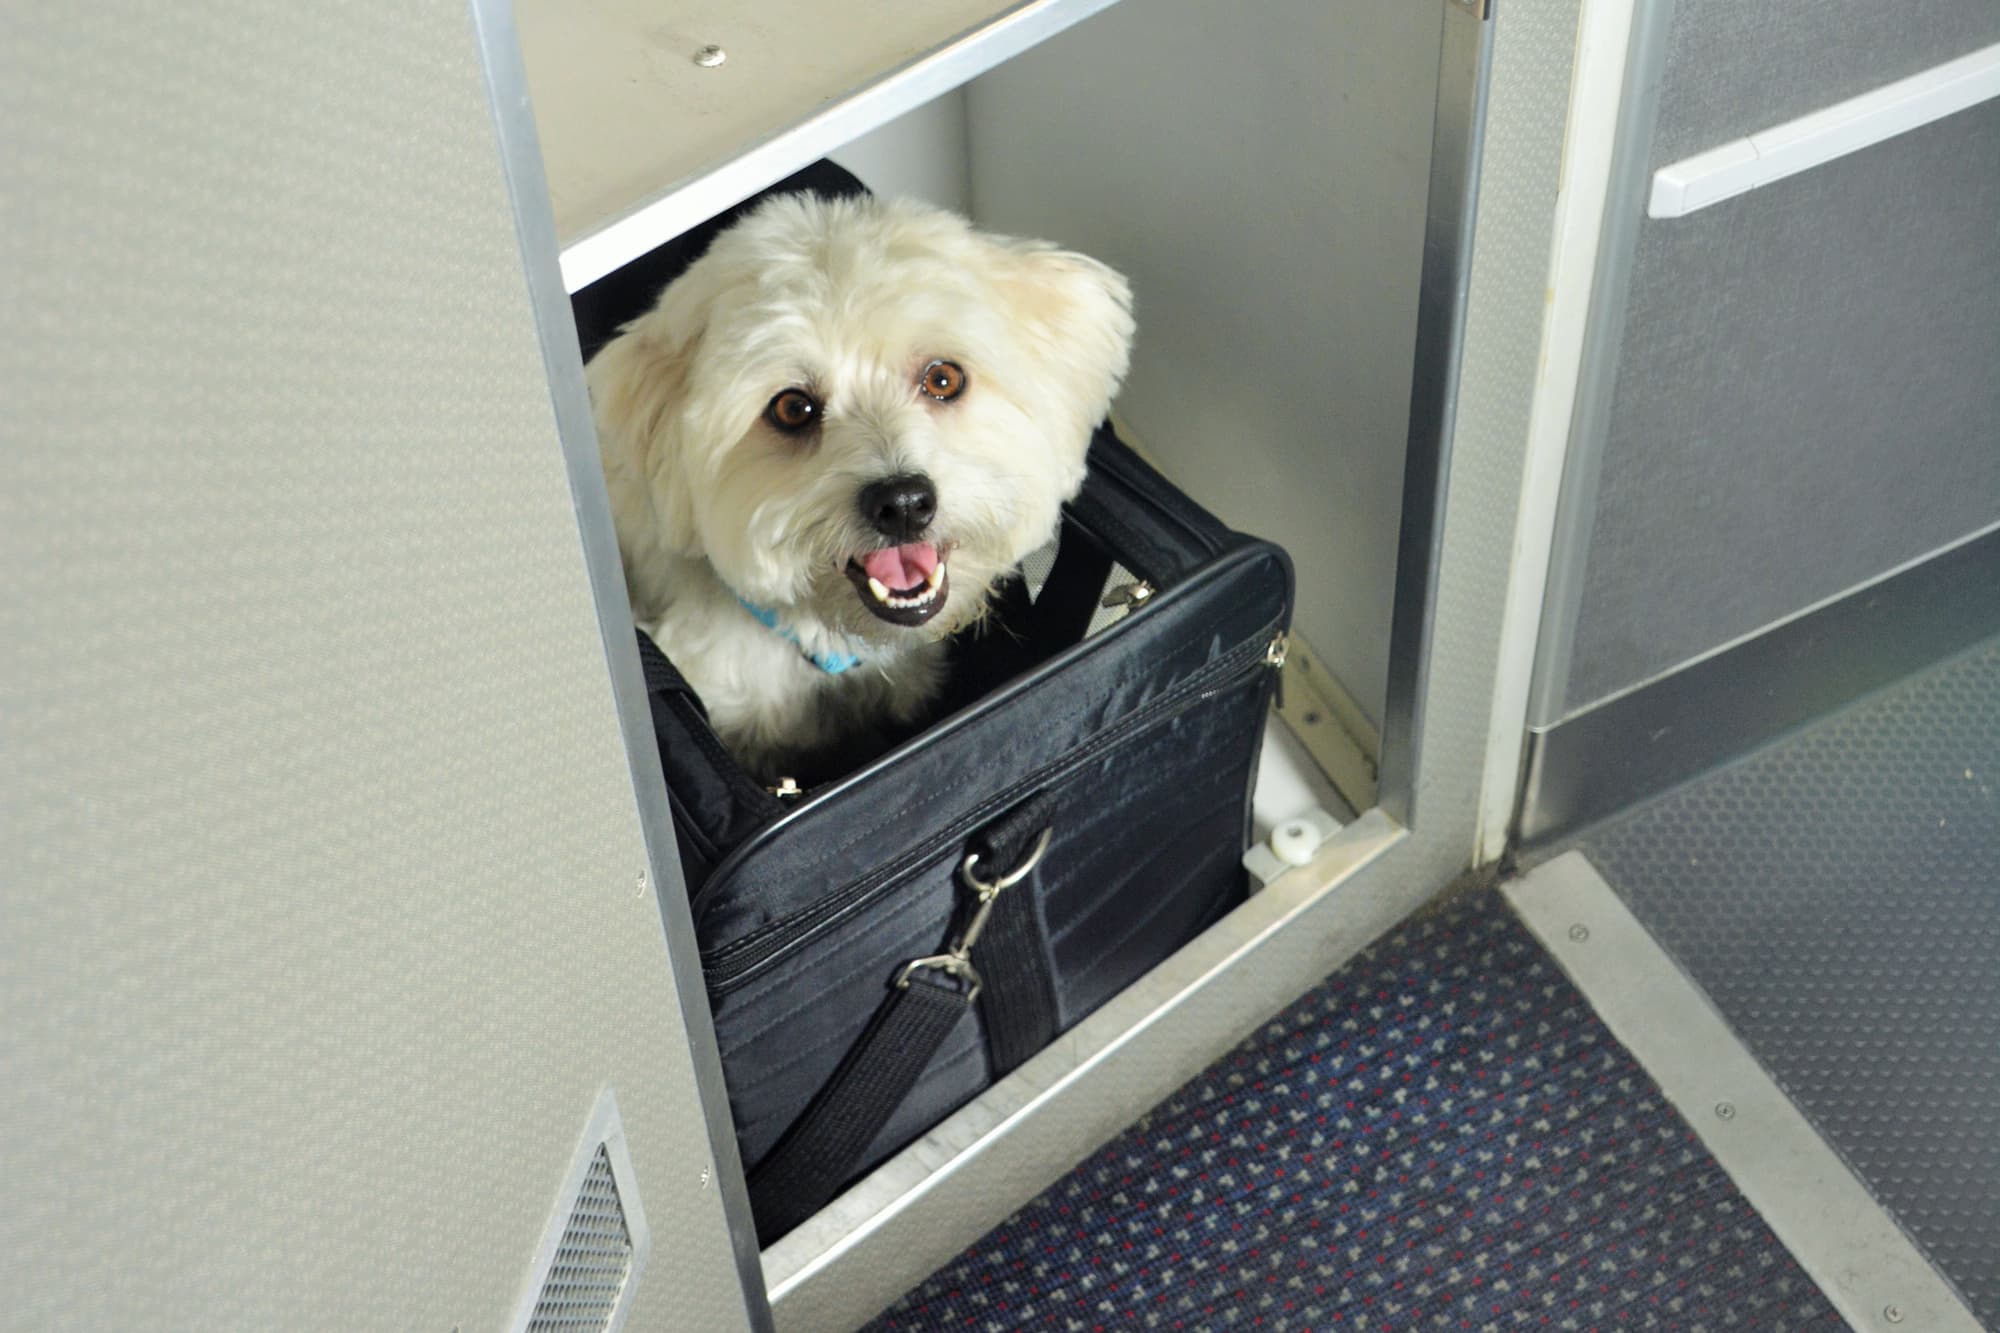 frontier airlines pets as carry on